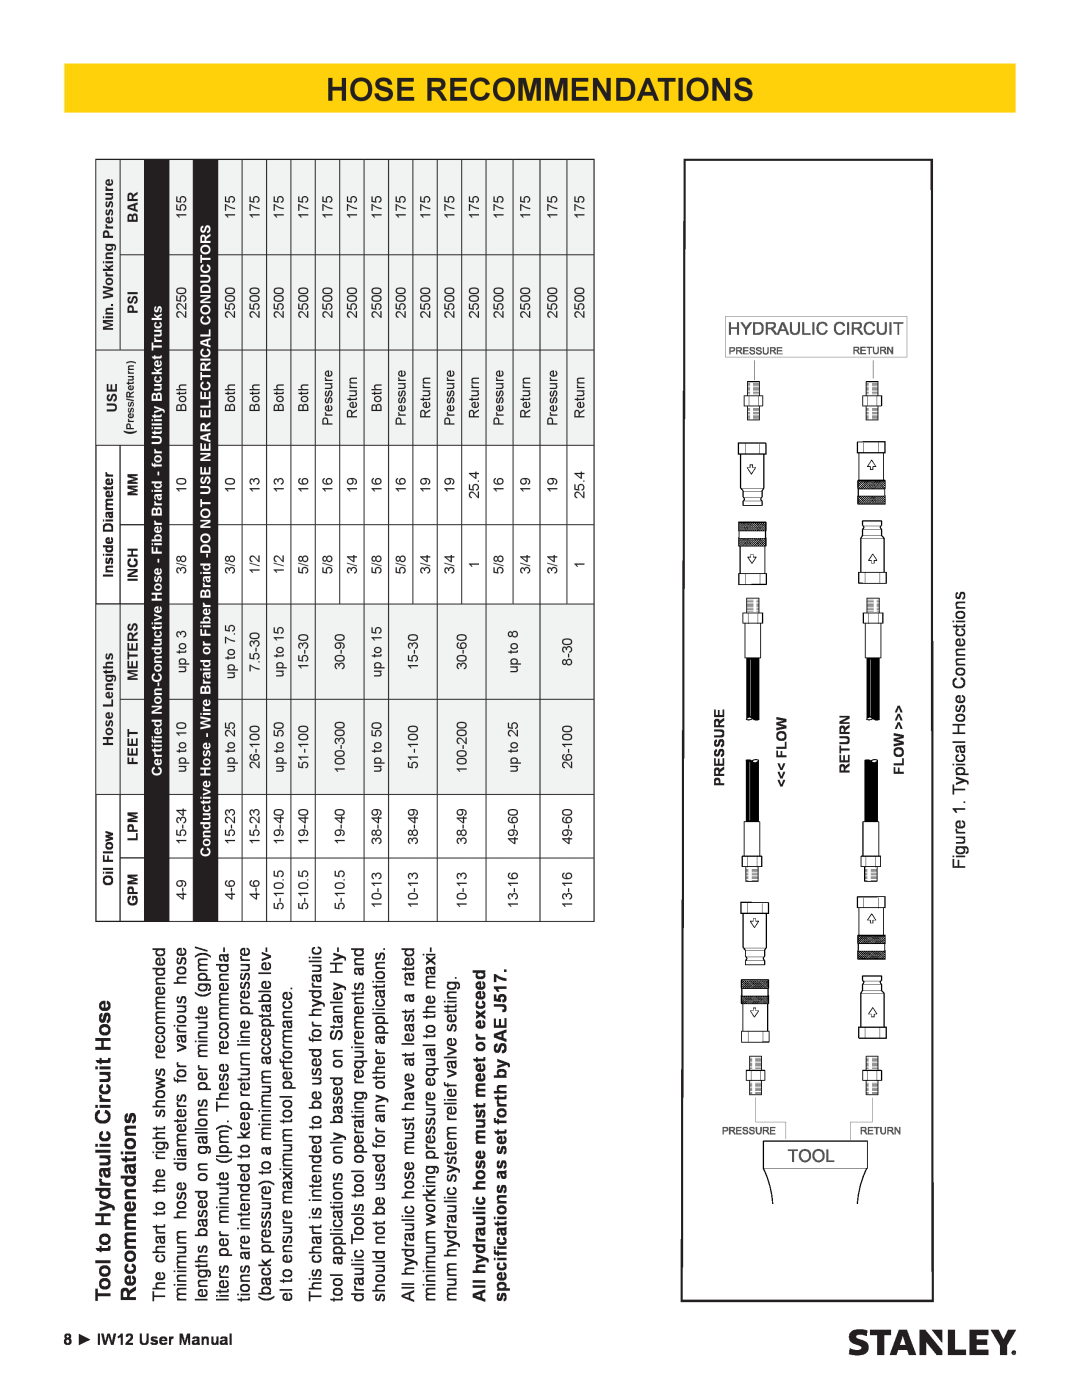 Stanley Black & Decker IW12 user manual Tool to Hydraulic Circuit Hose Recommendations 